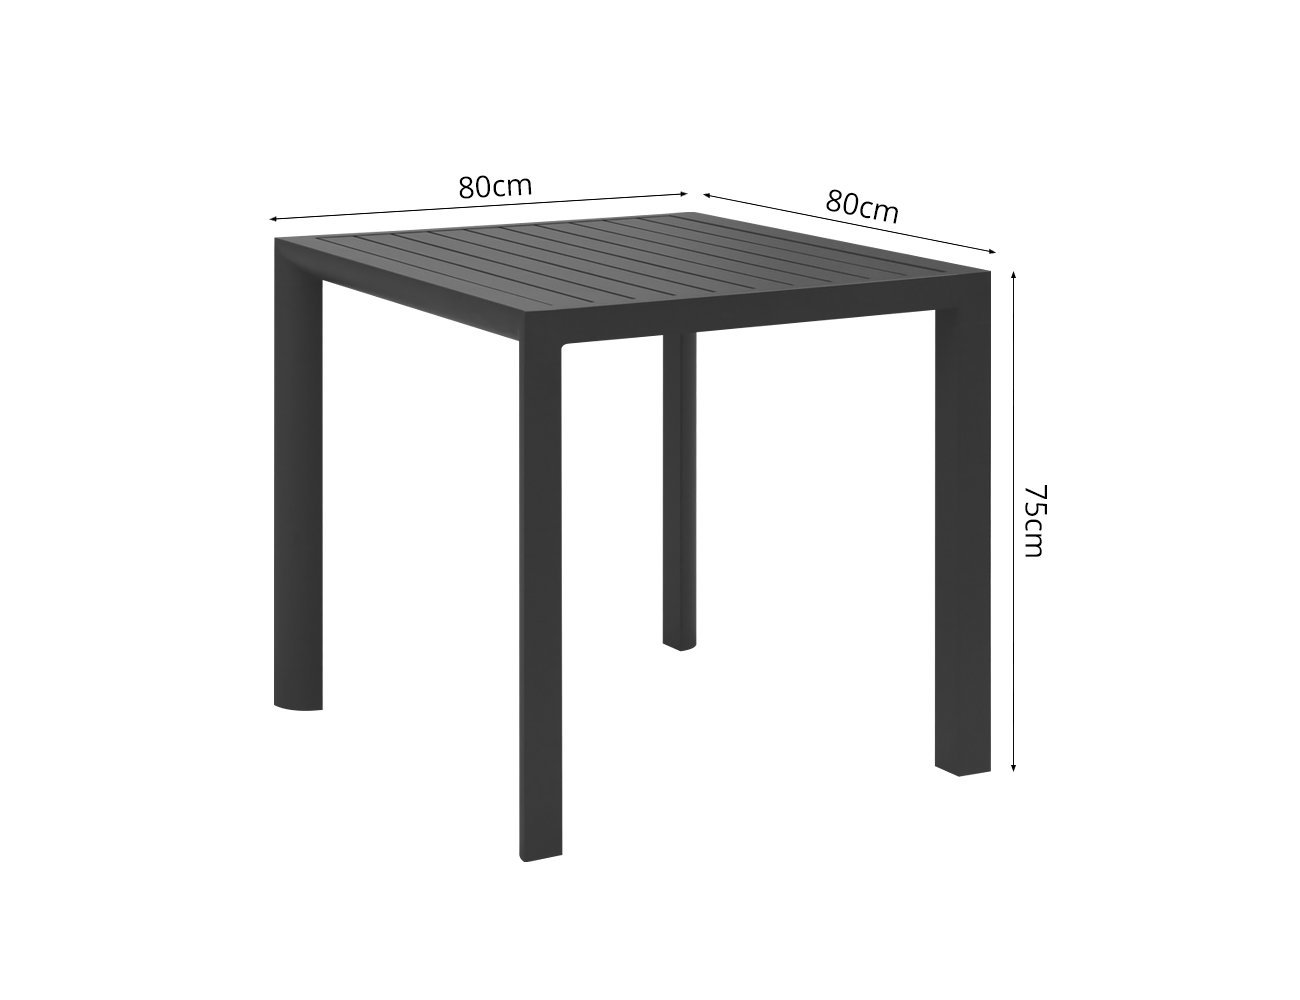 Arcus Outdoor Table - Grey @ Crazy Sales - We have the best daily deals